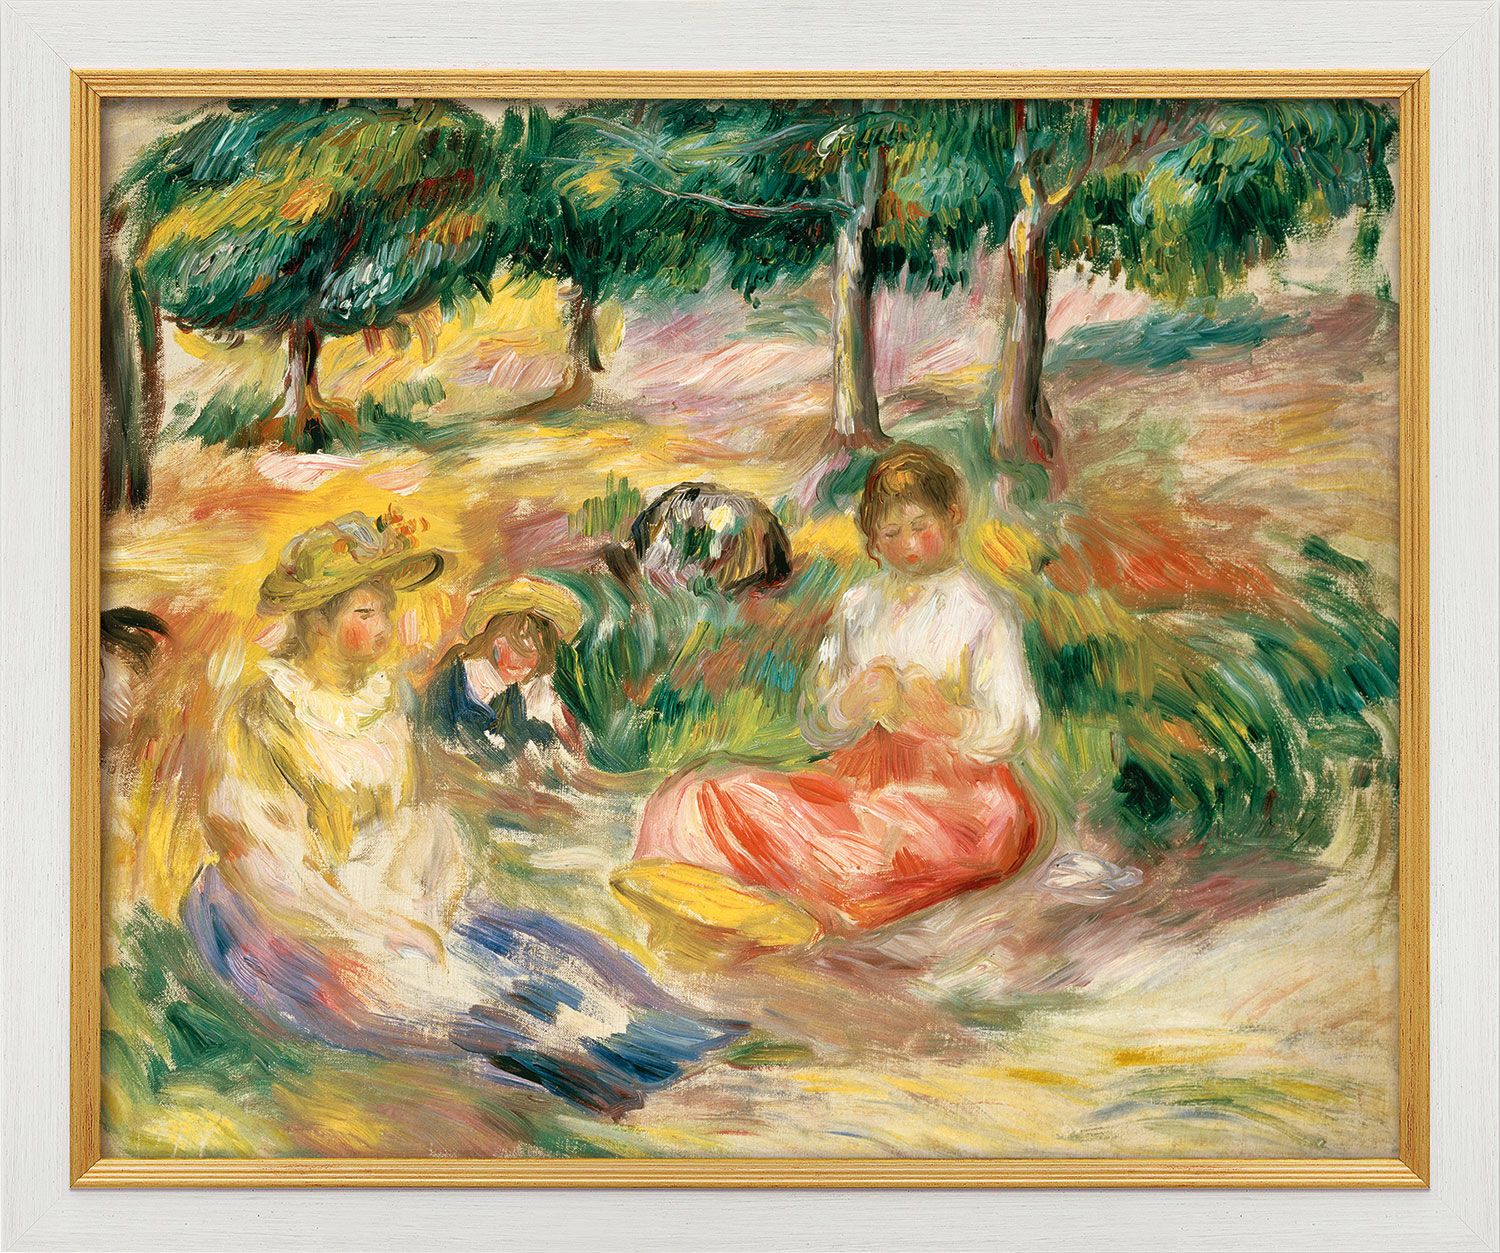 Picture "Three Young Girls Sitting in the Grass" (1896-97), white and golden framed version by Auguste Renoir